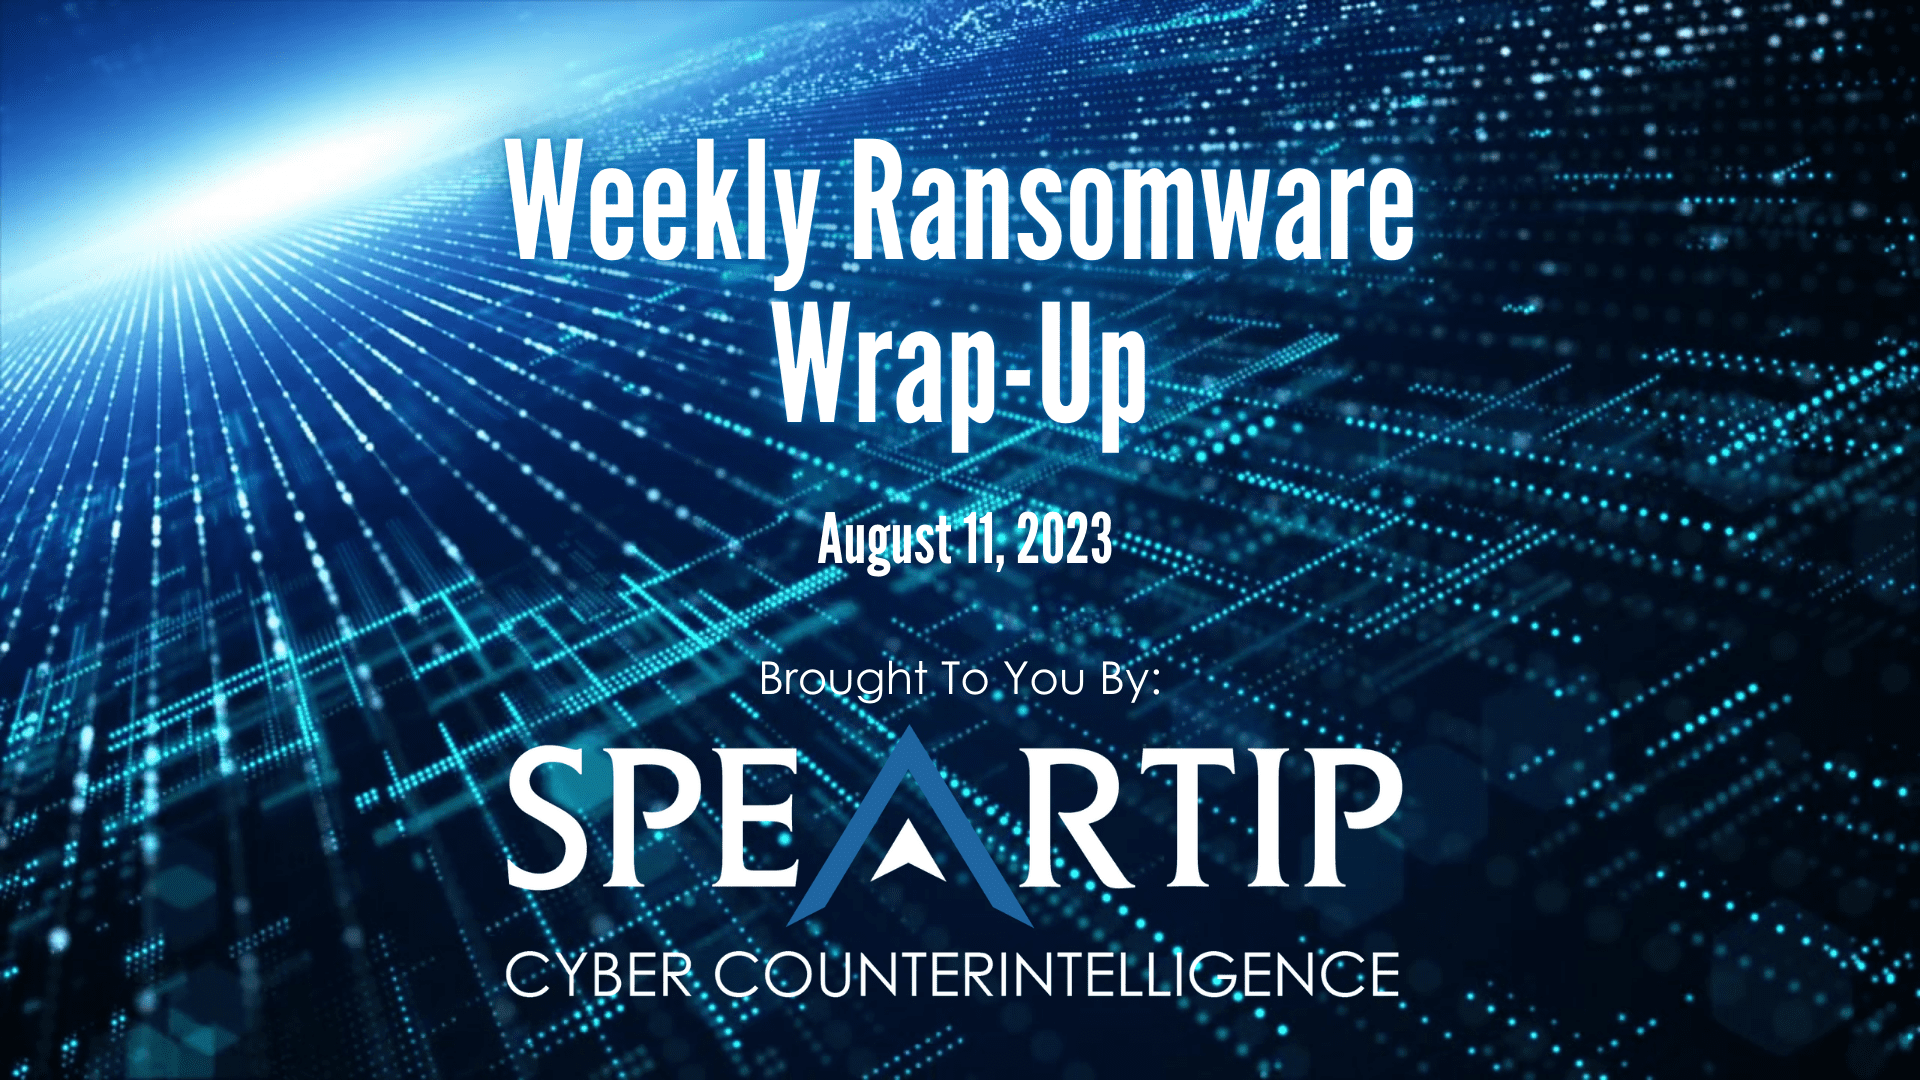 August-11-2023-Weekly Ransomware Wrap-up